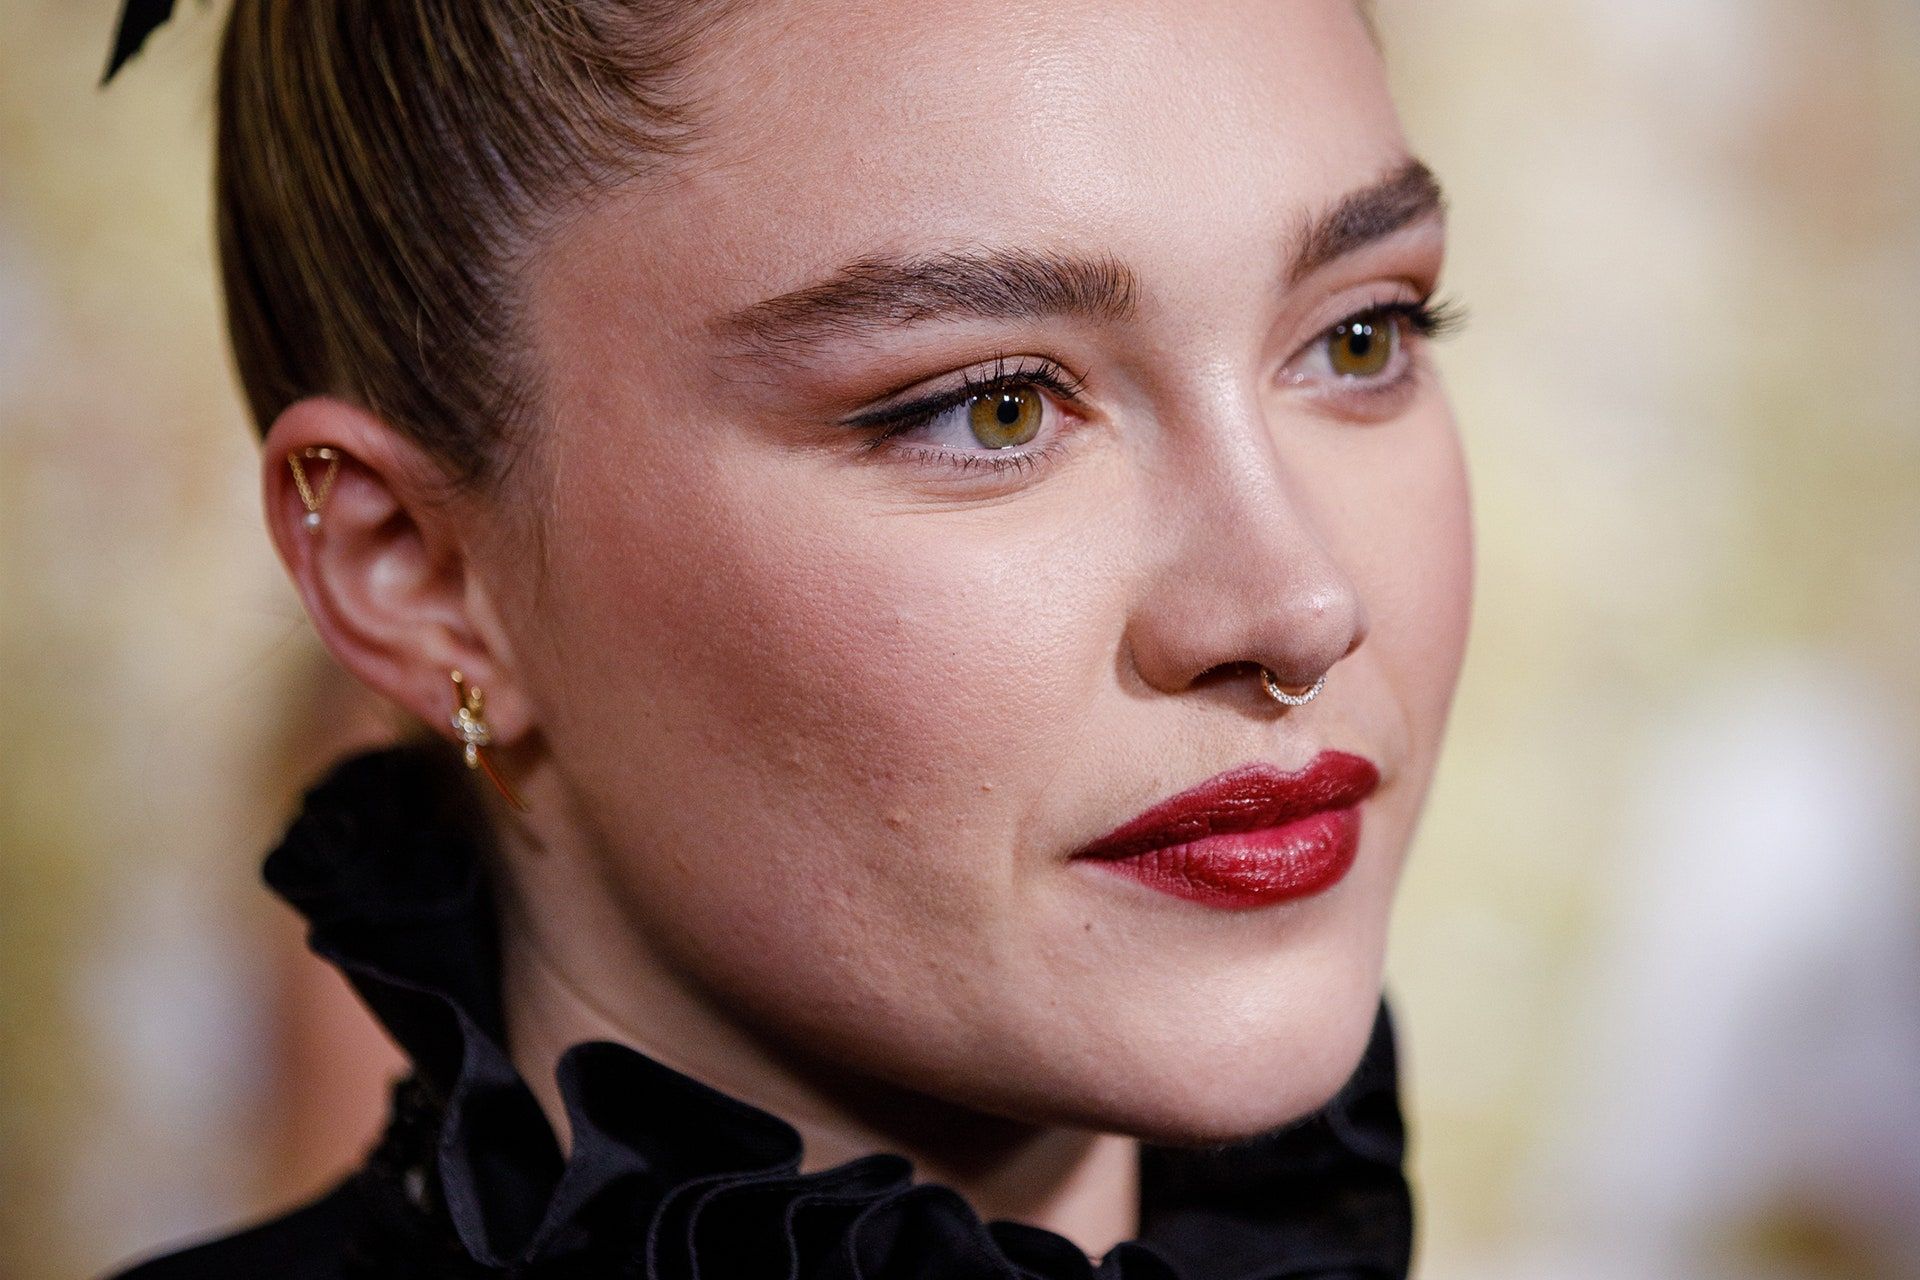 Florence Pugh brought the 'Audrey Hepburn aesthetic' to the Oscars 2023